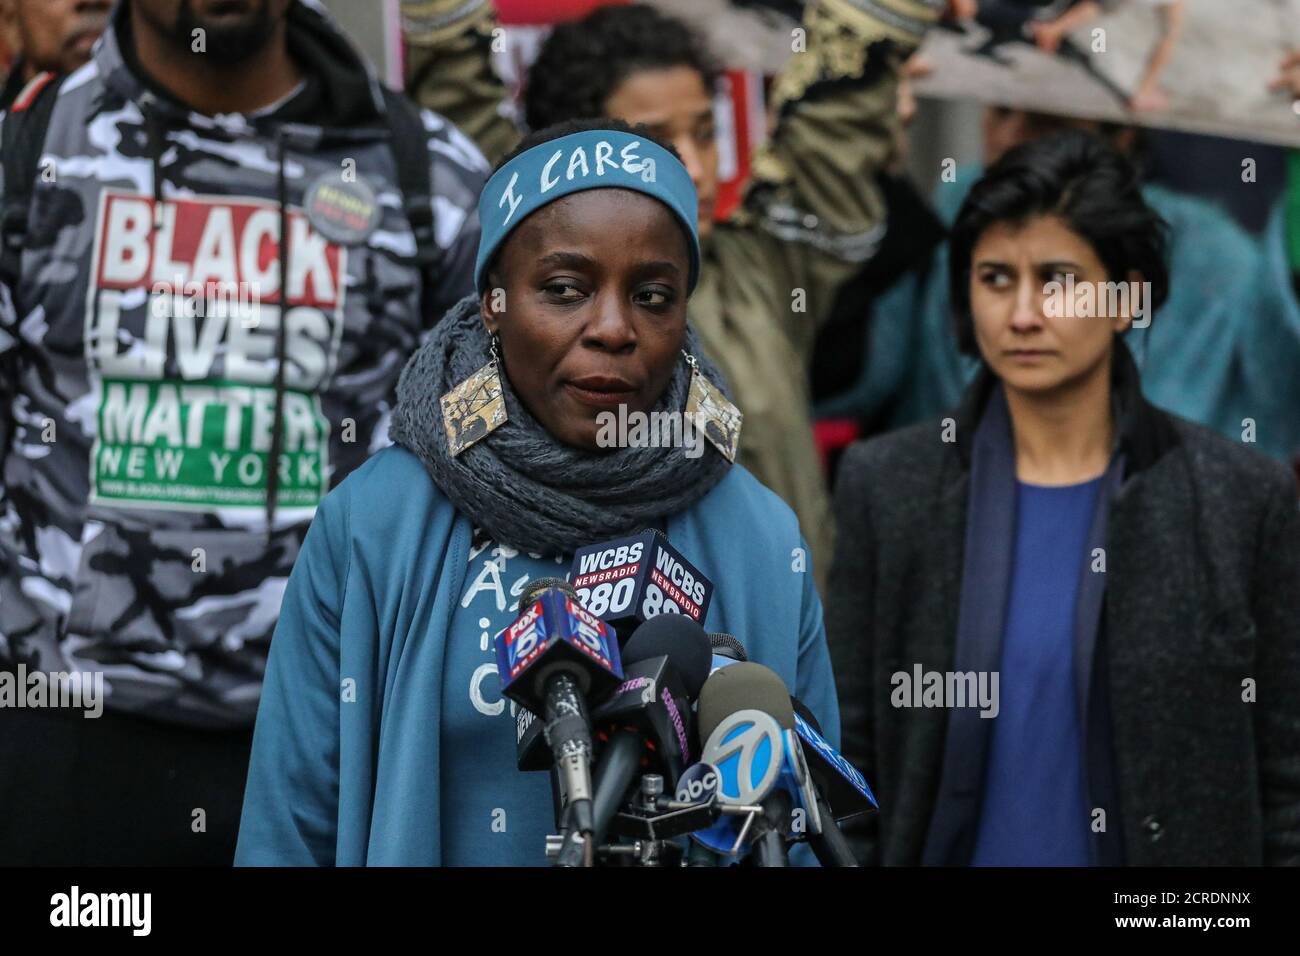 Therese Okoumou, Statue of Liberty climber, talks to Media at the United States Courthouse in the Manhattan borough of New York City, New York, U.S., December 17, 2018. REUTERS/Jeenah Moon Stock Photo